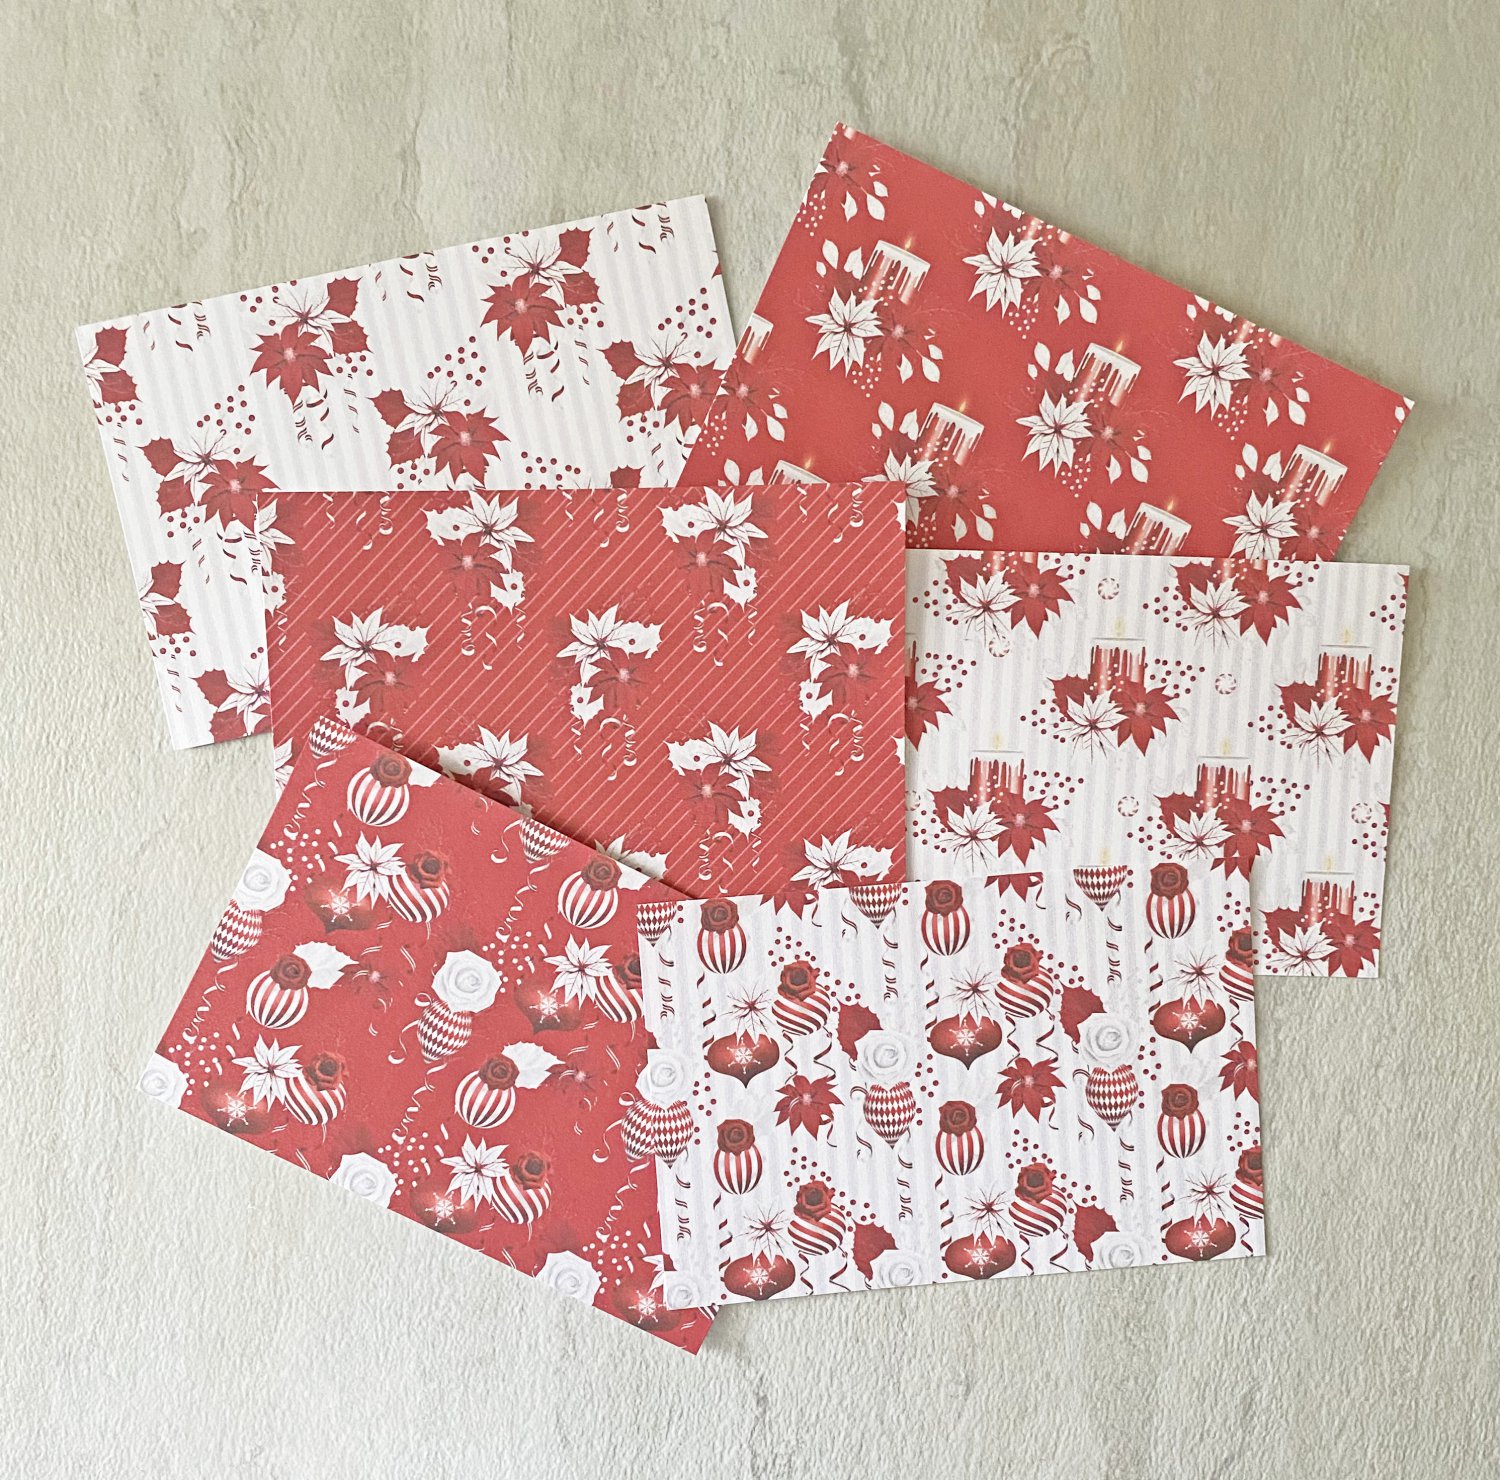 Red and White Poinsettia Christmas Stationery Postcards 6 Piece Set